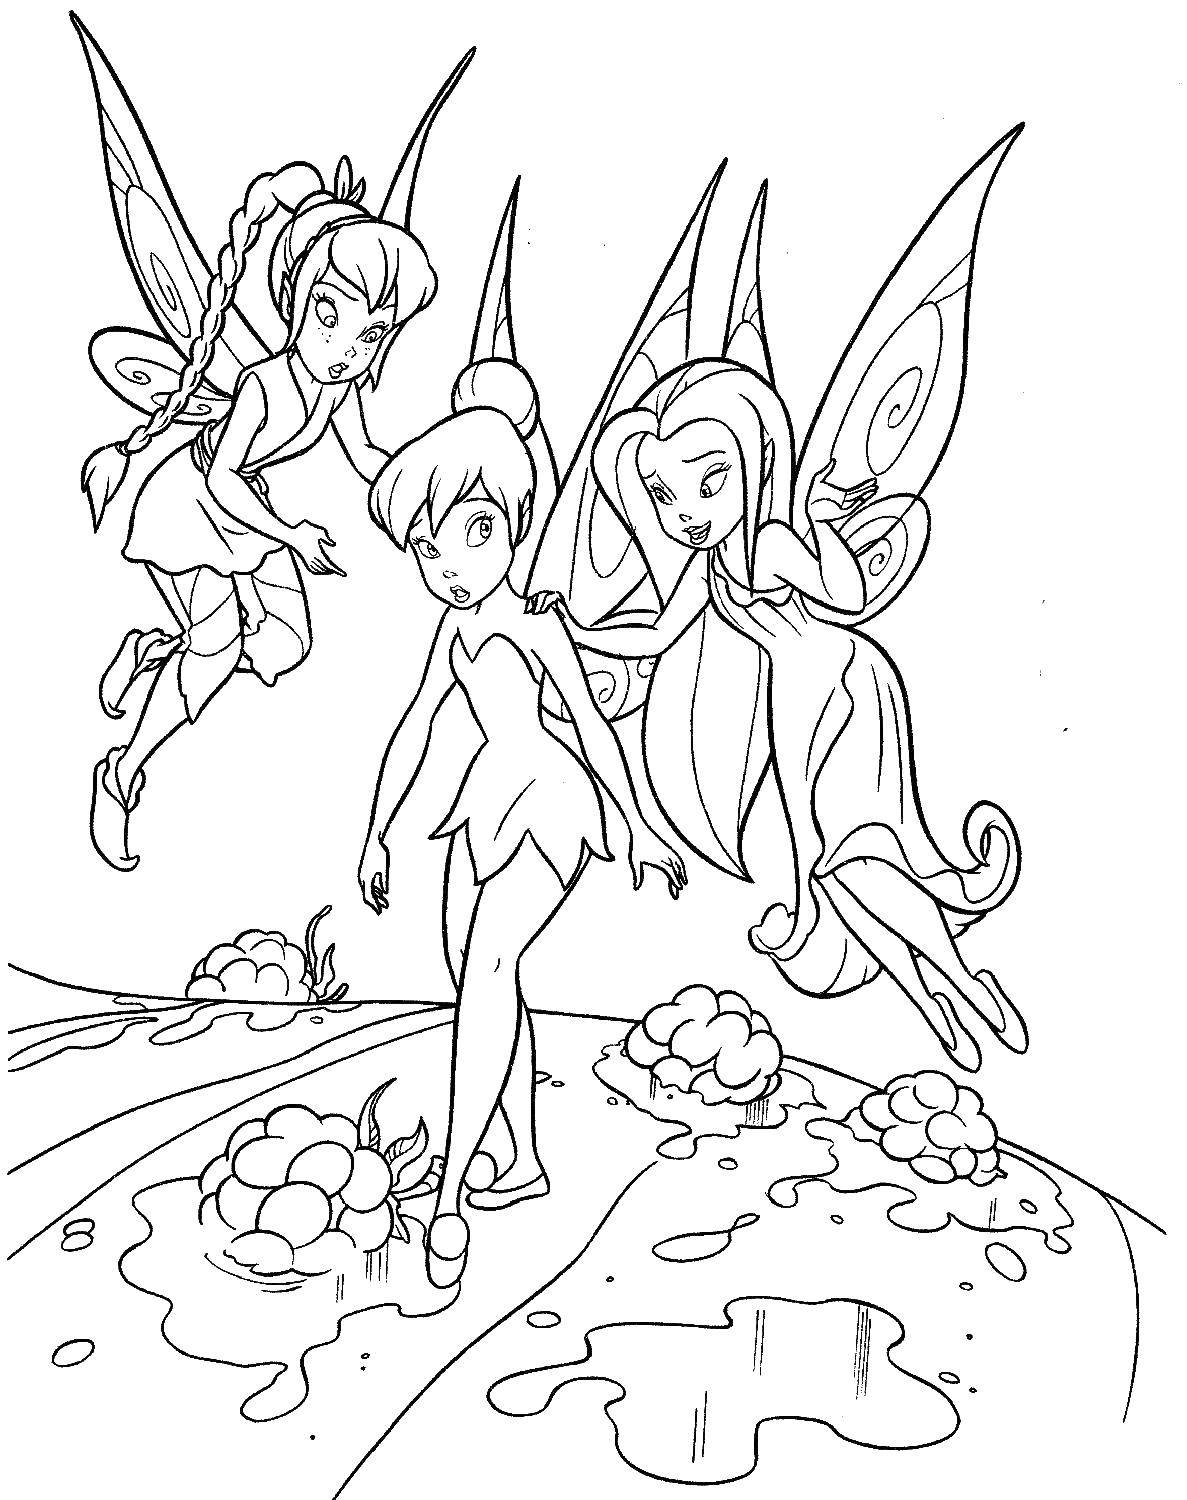 Coloring Fairy friend dindin. Category fairies. Tags:  fairies.